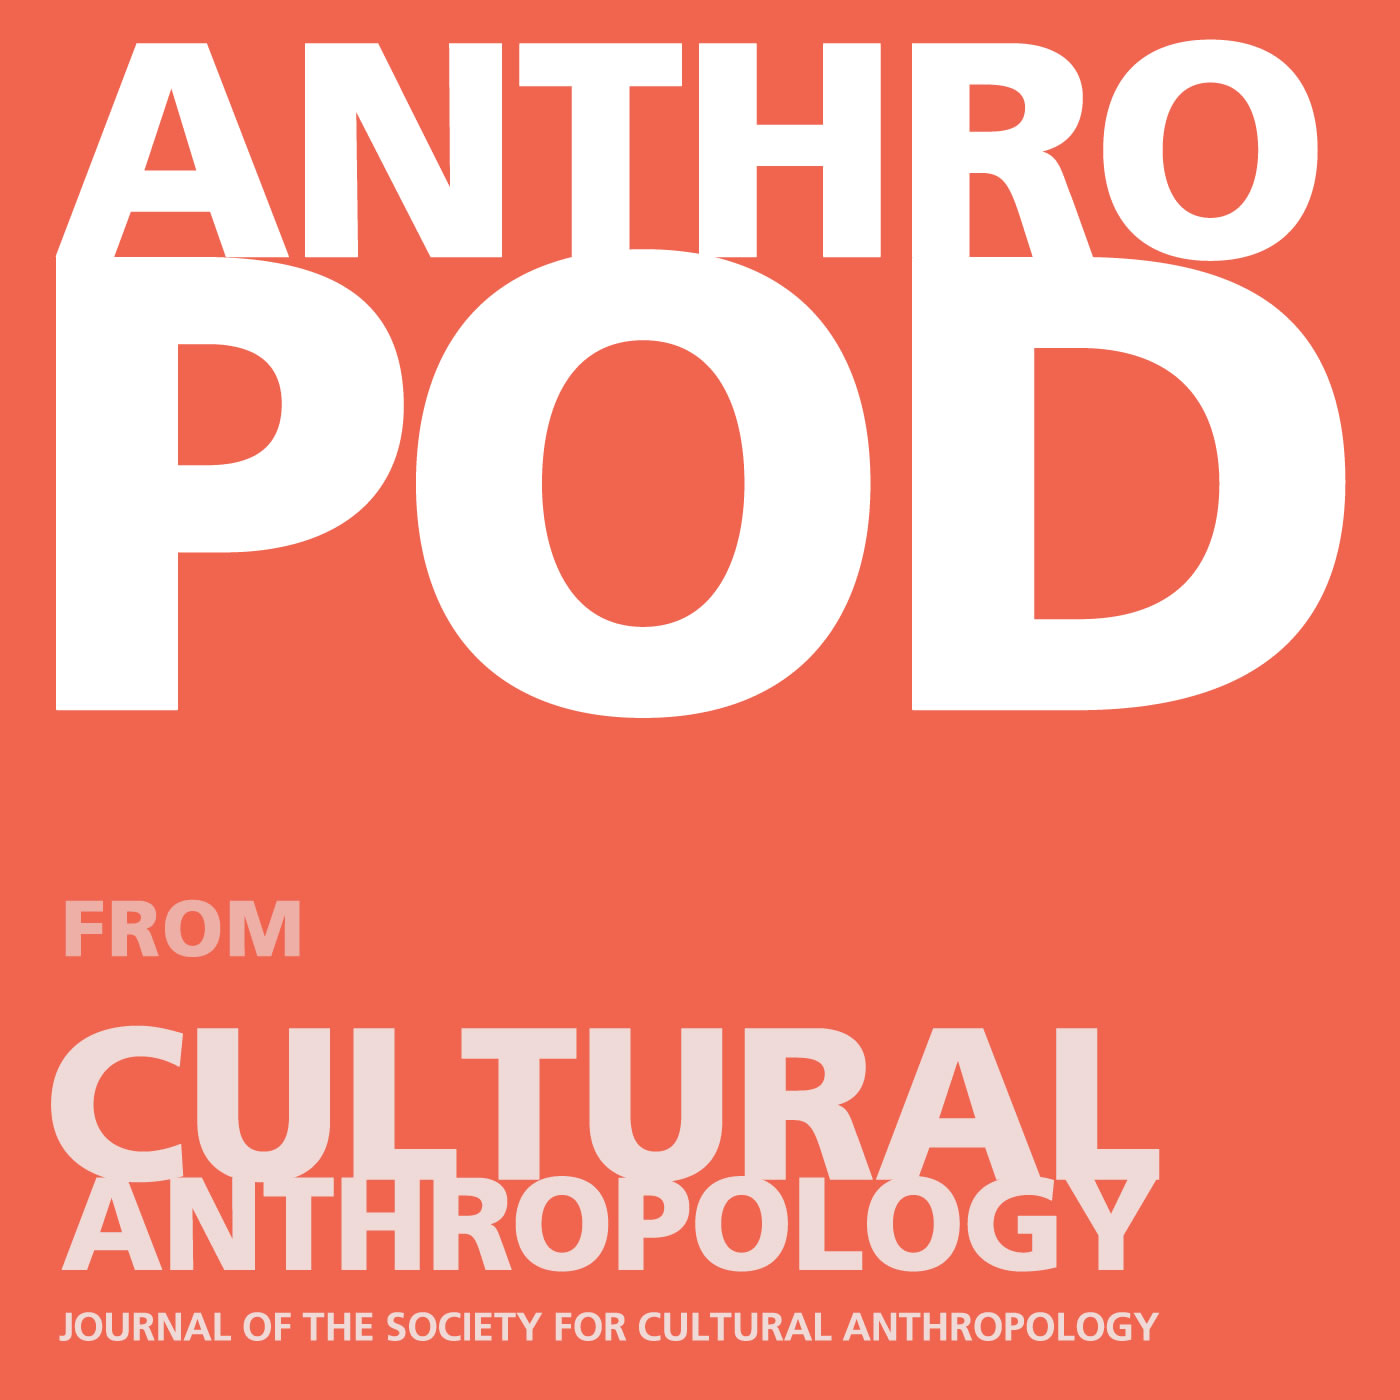 Anthro Pod from Cultural Anthropology Journal of the society for cultural anthropology